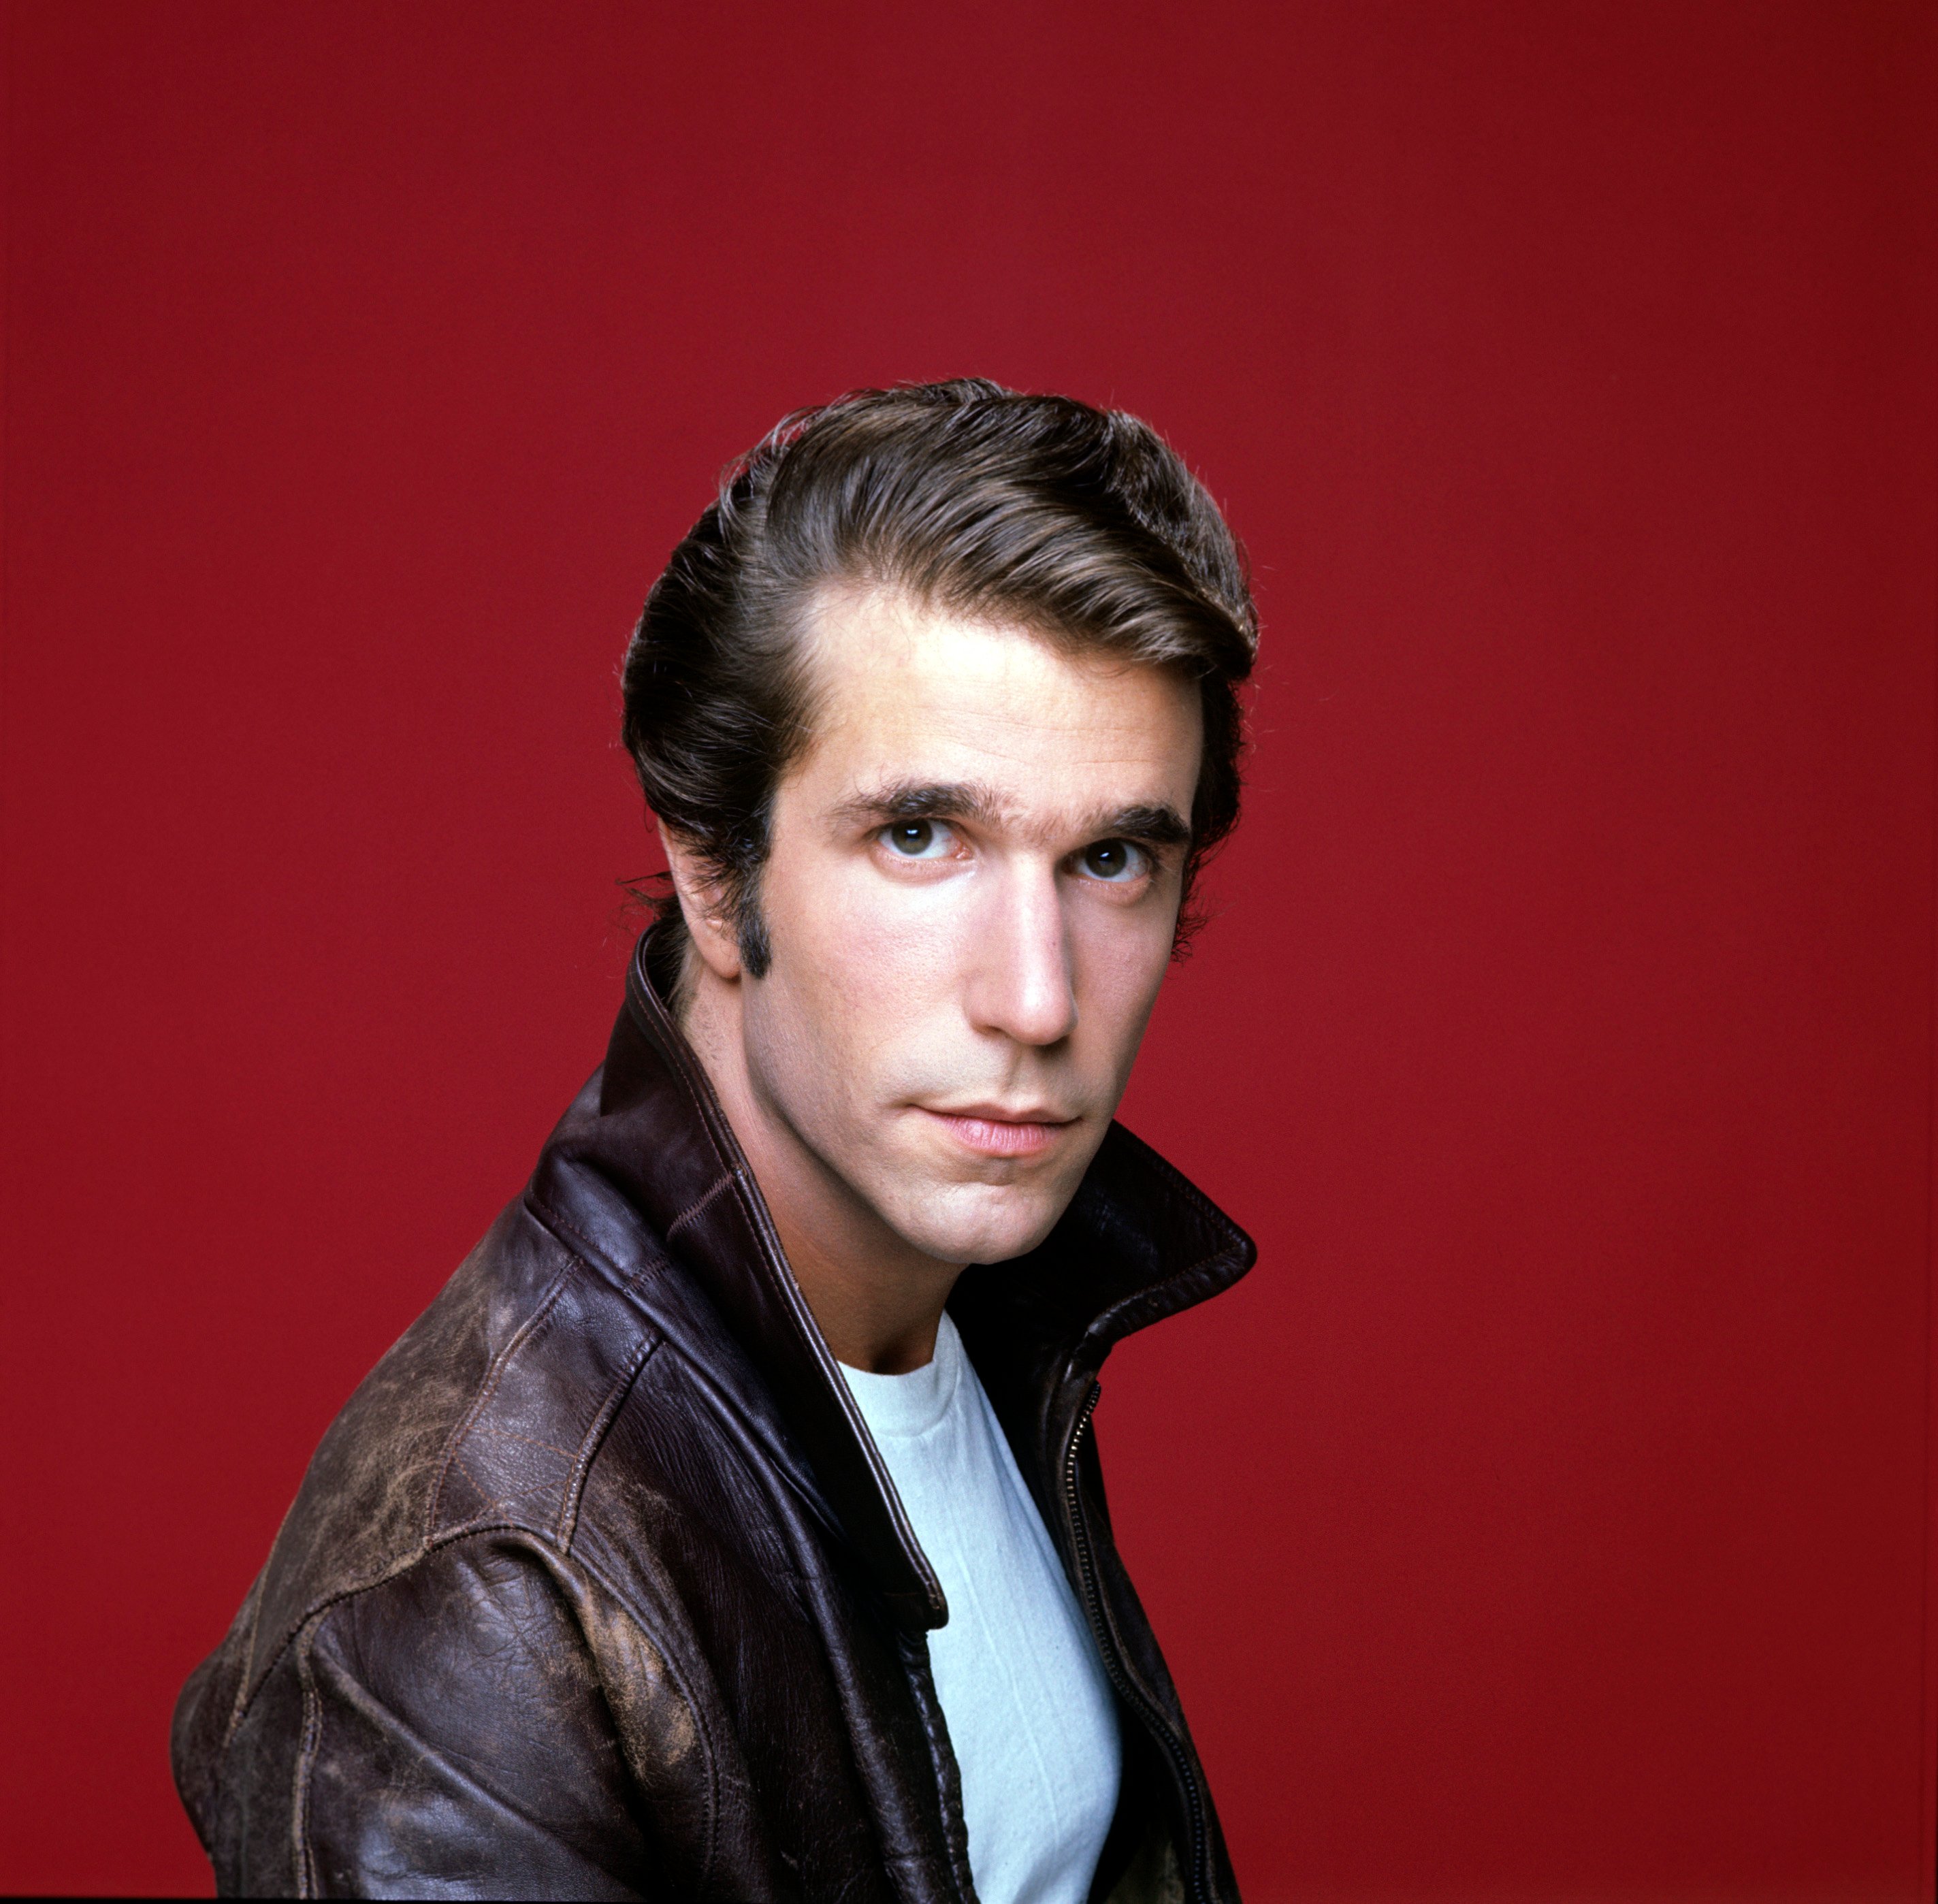 The Fonzie in front of a red background